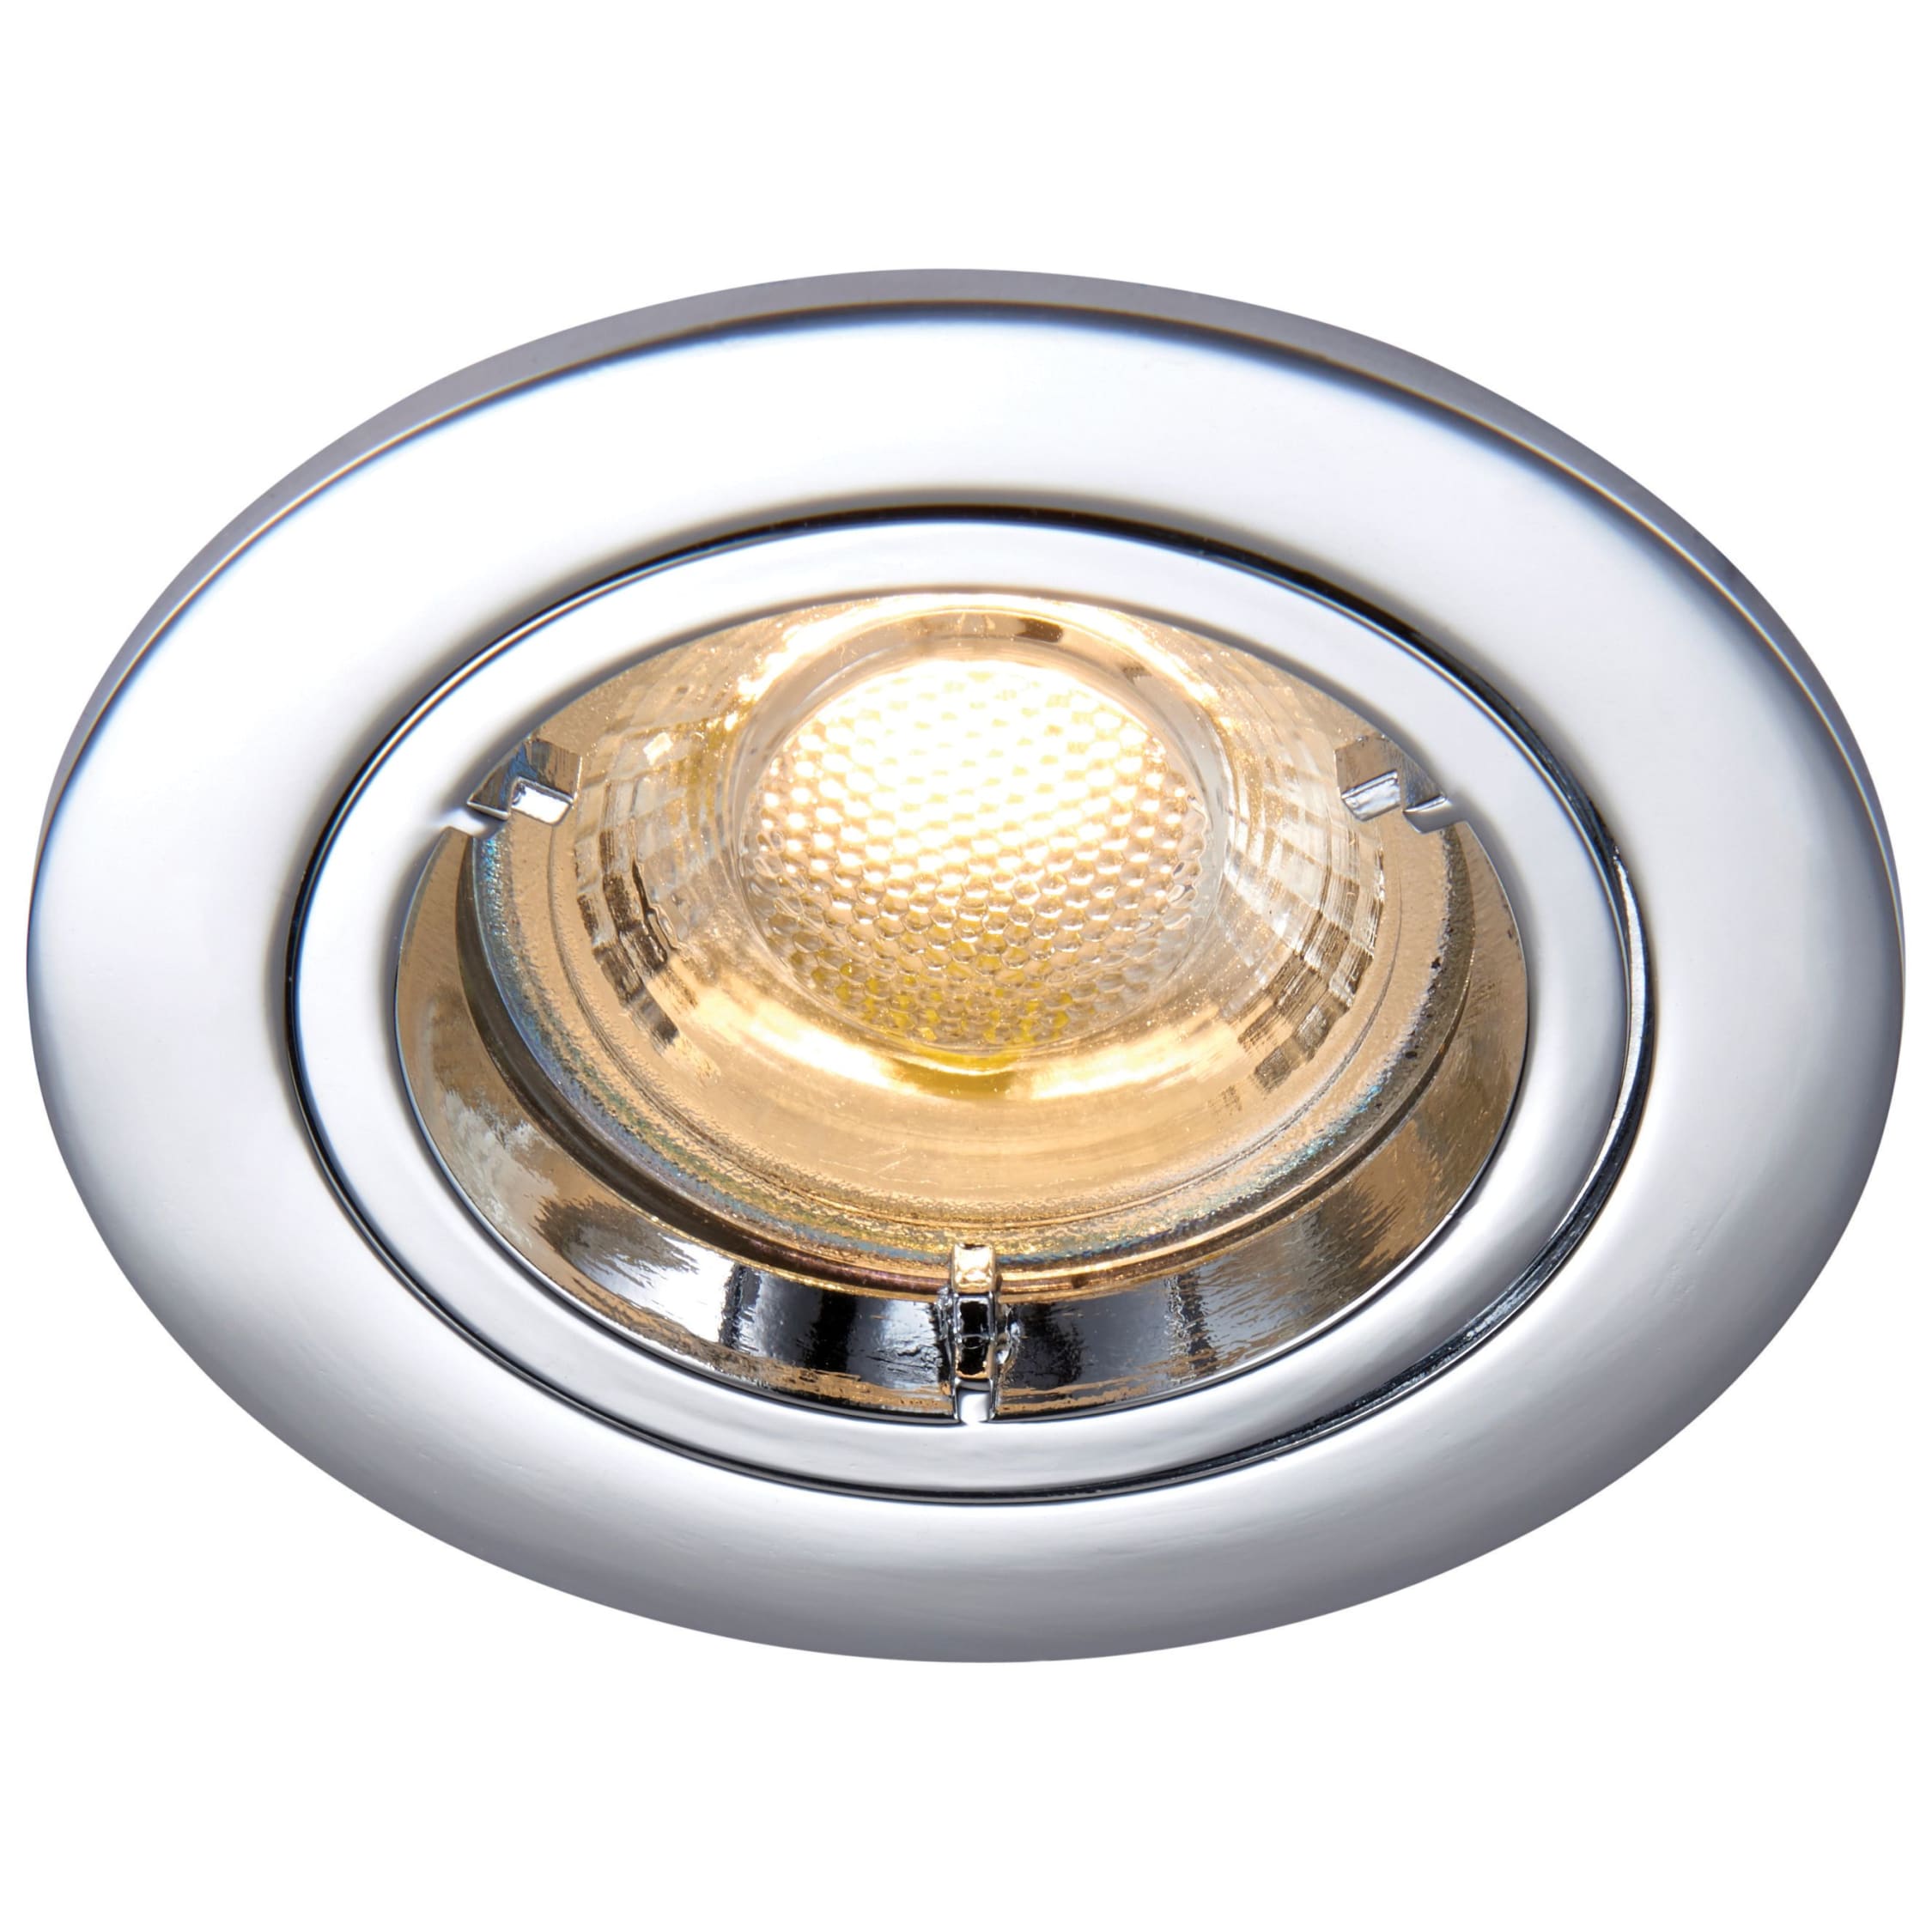 SAXBY SHIELD Brushed Chrome Tilt Fire Rated Downlight GU10 Recessed Spotlight 